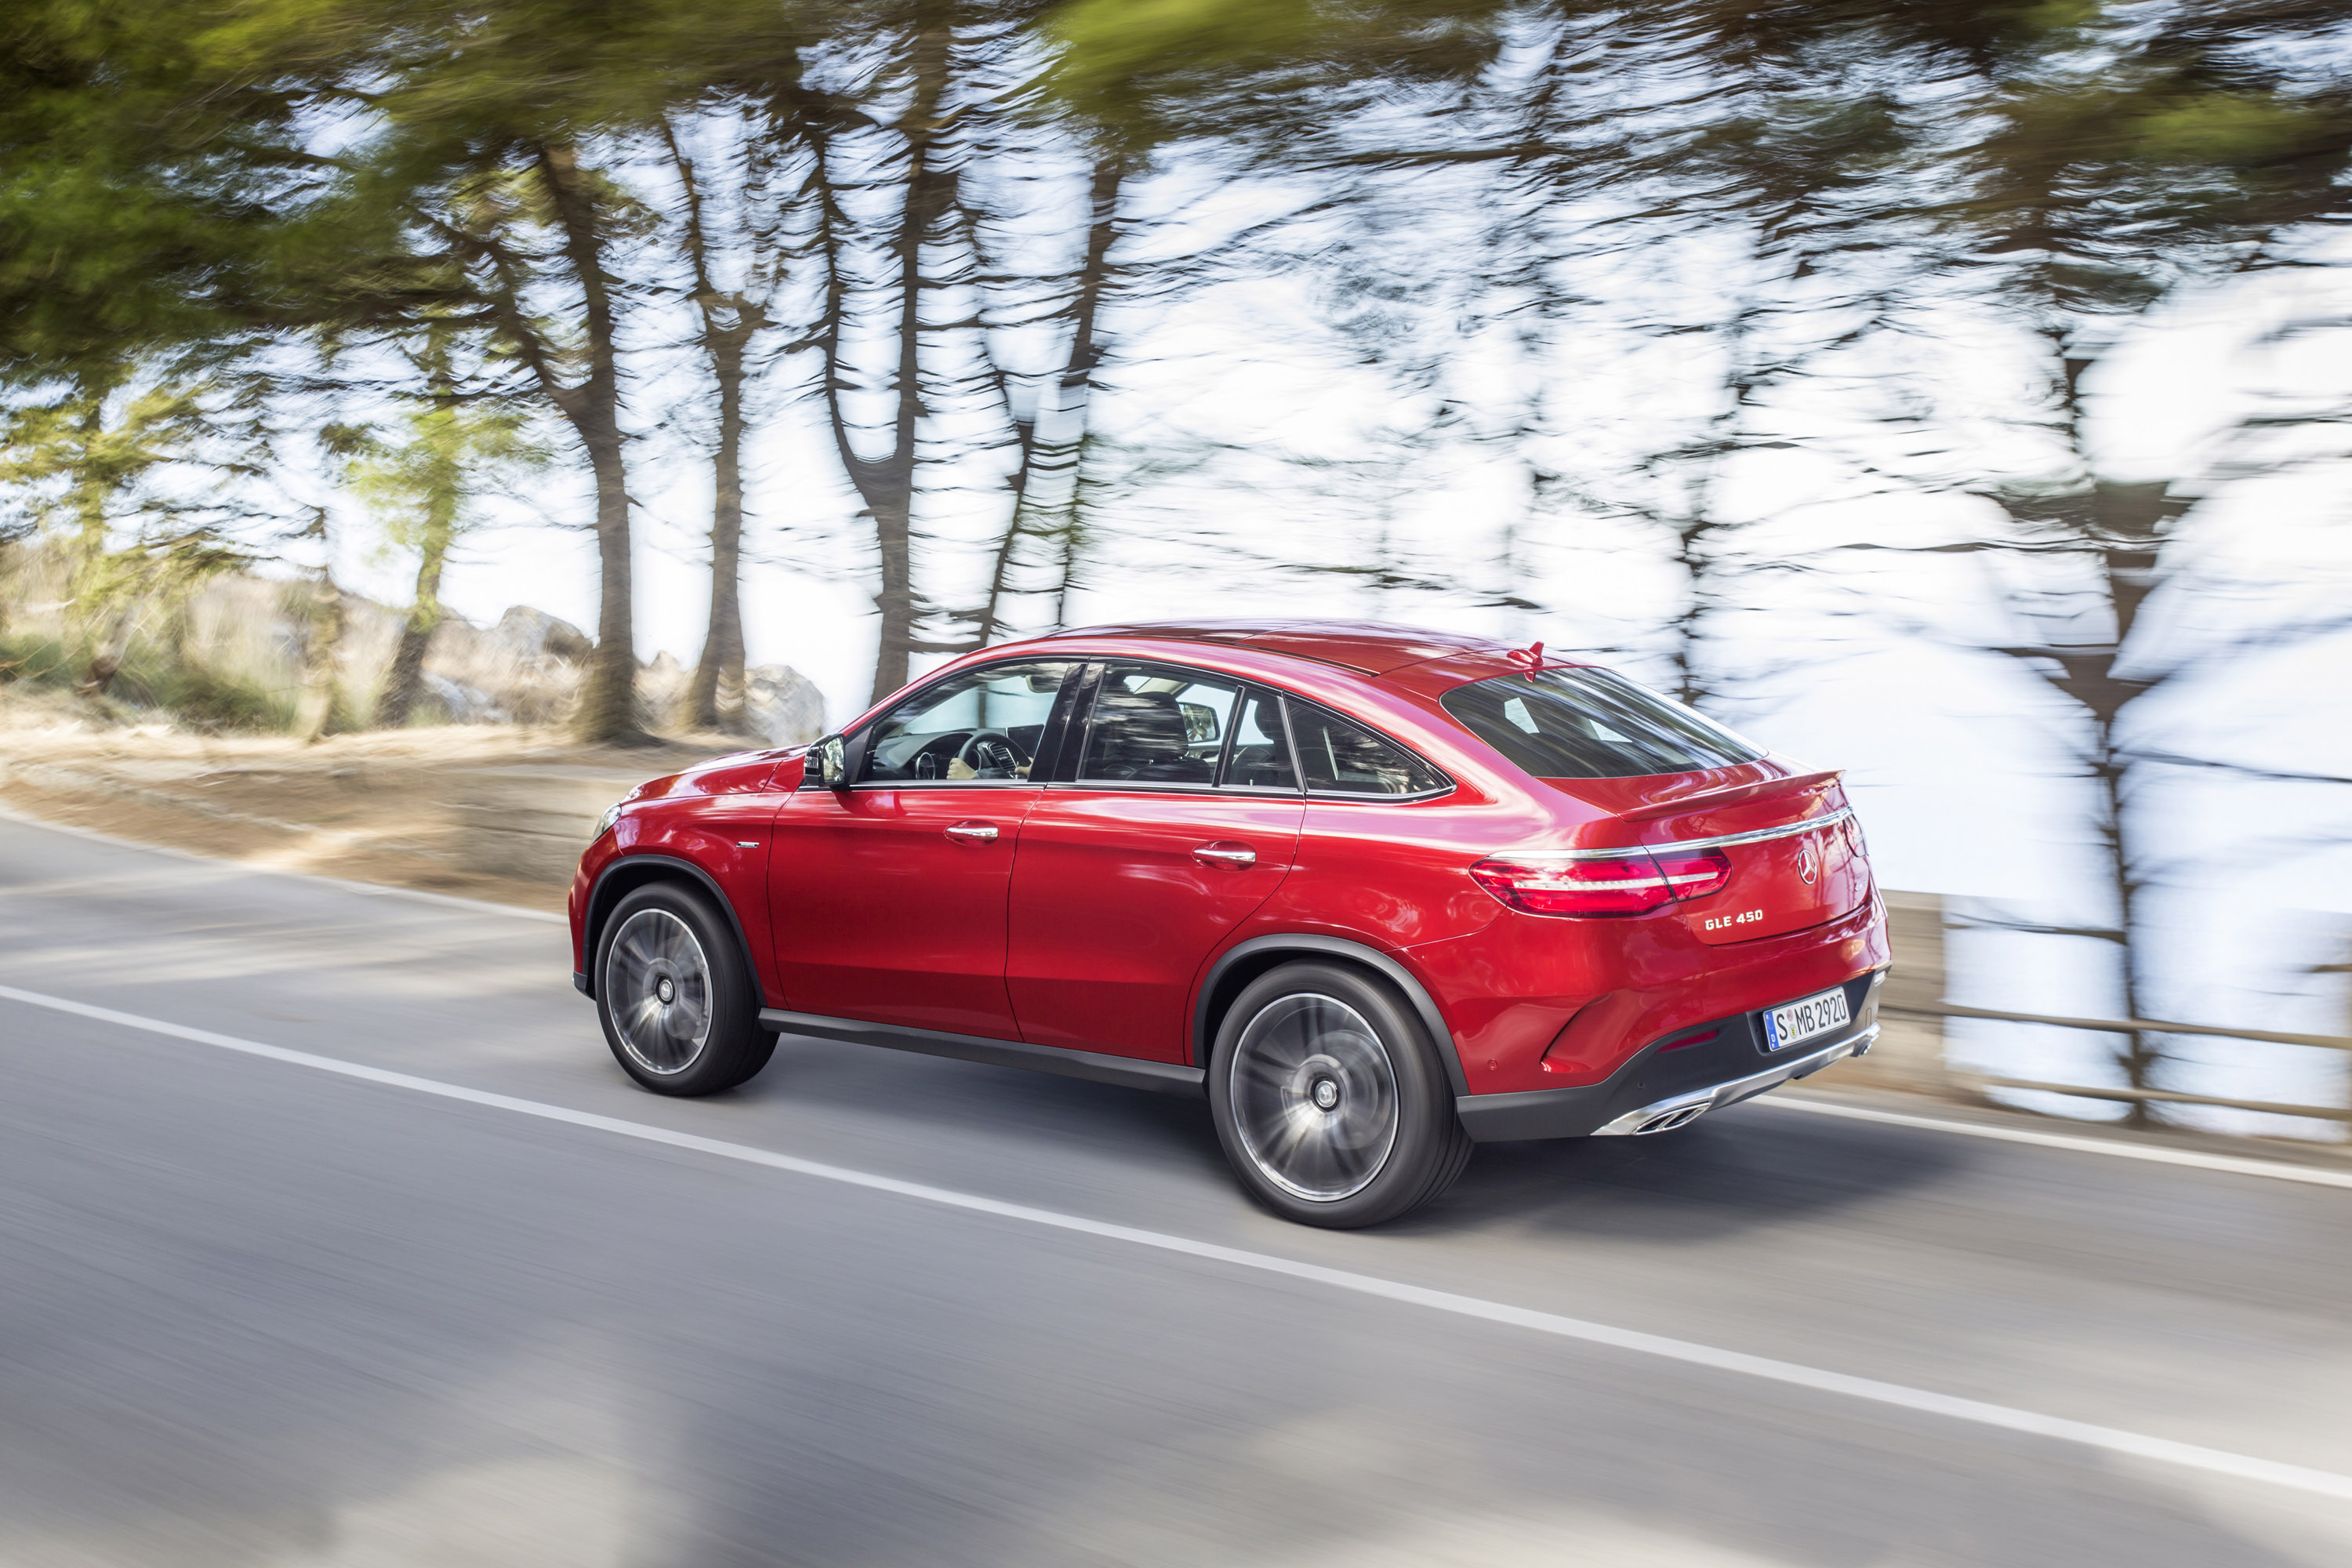 Mercedes-Benz GLE450 AMG Coupe